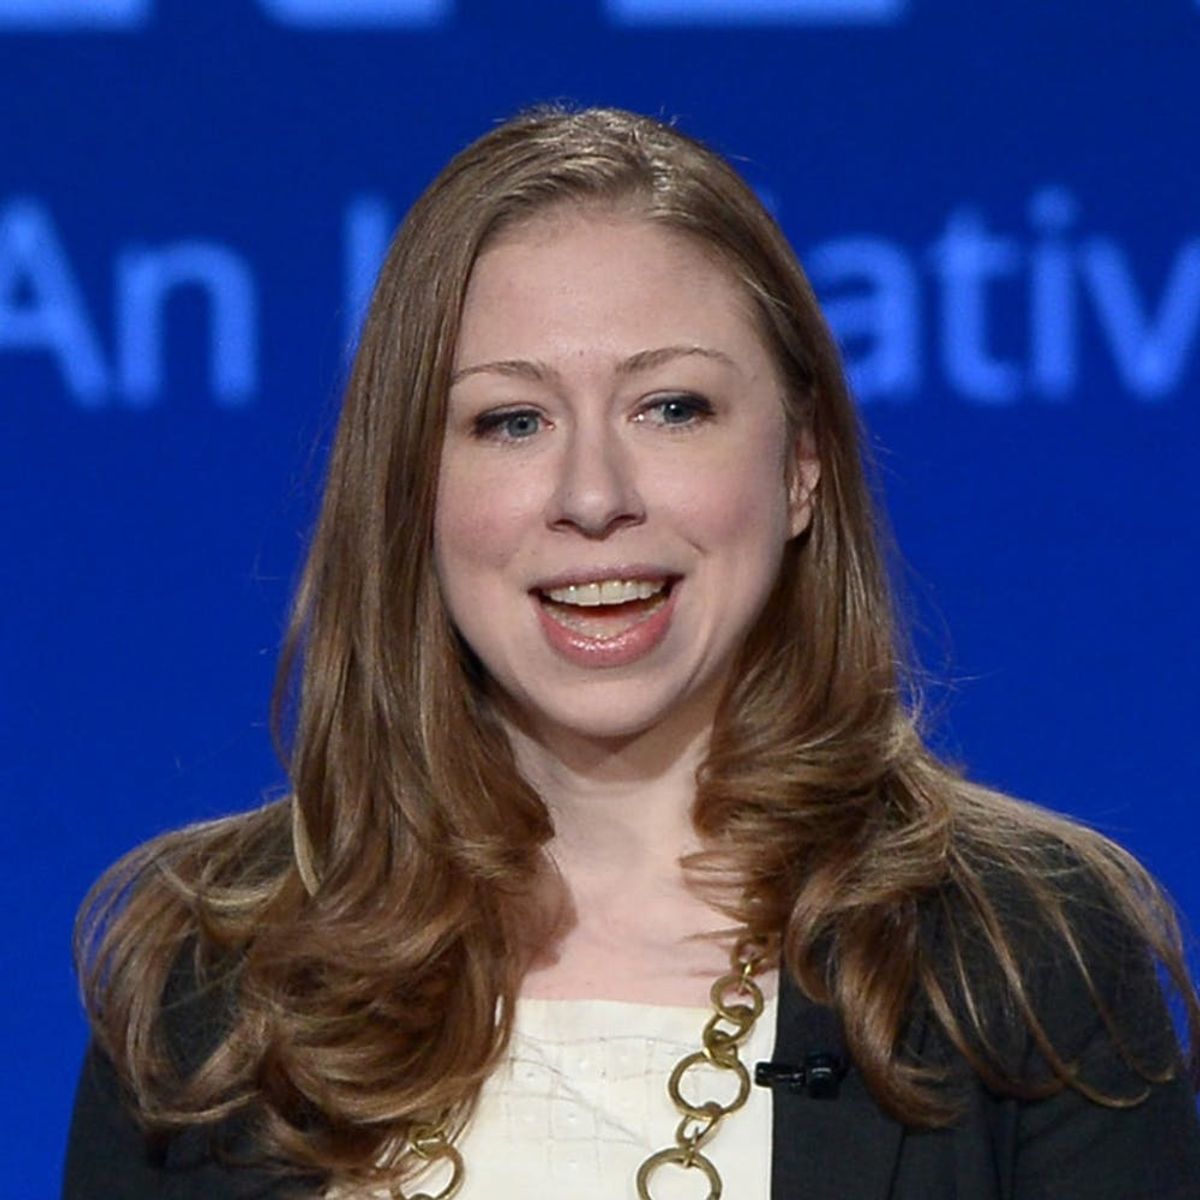 Chelsea Clinton’s Troll Comeback Is a Good Reminder That Not Everything Online Is Real